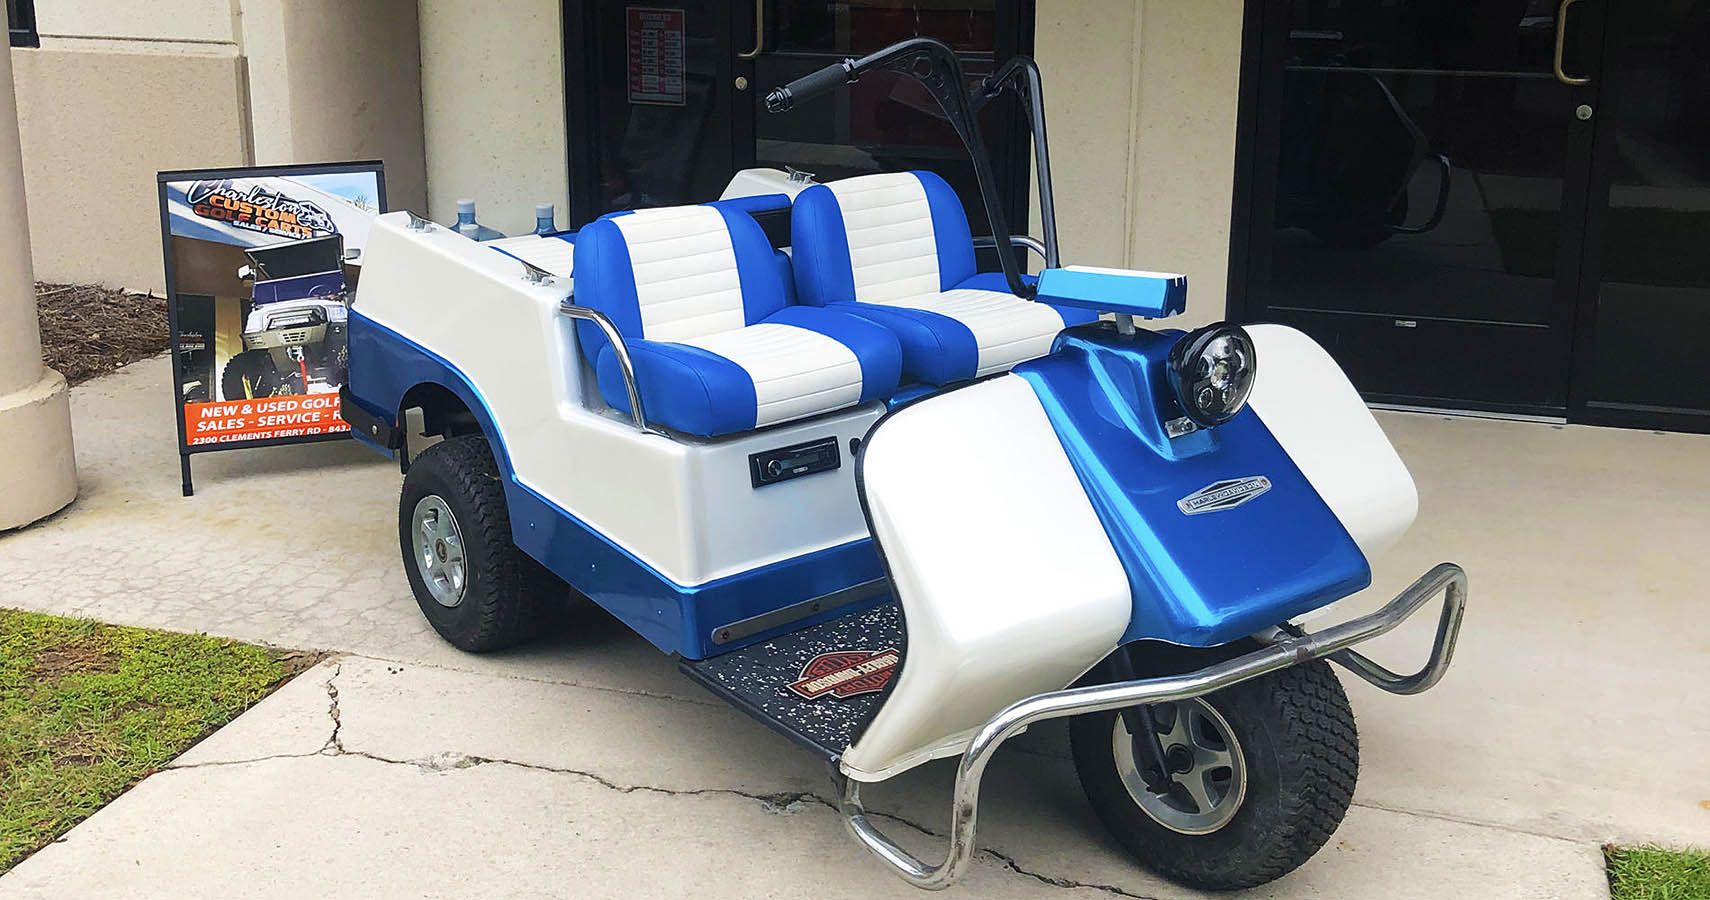 Elvis Presley's 1967 Model Was The Most Famous H-D Golf Cart Of All